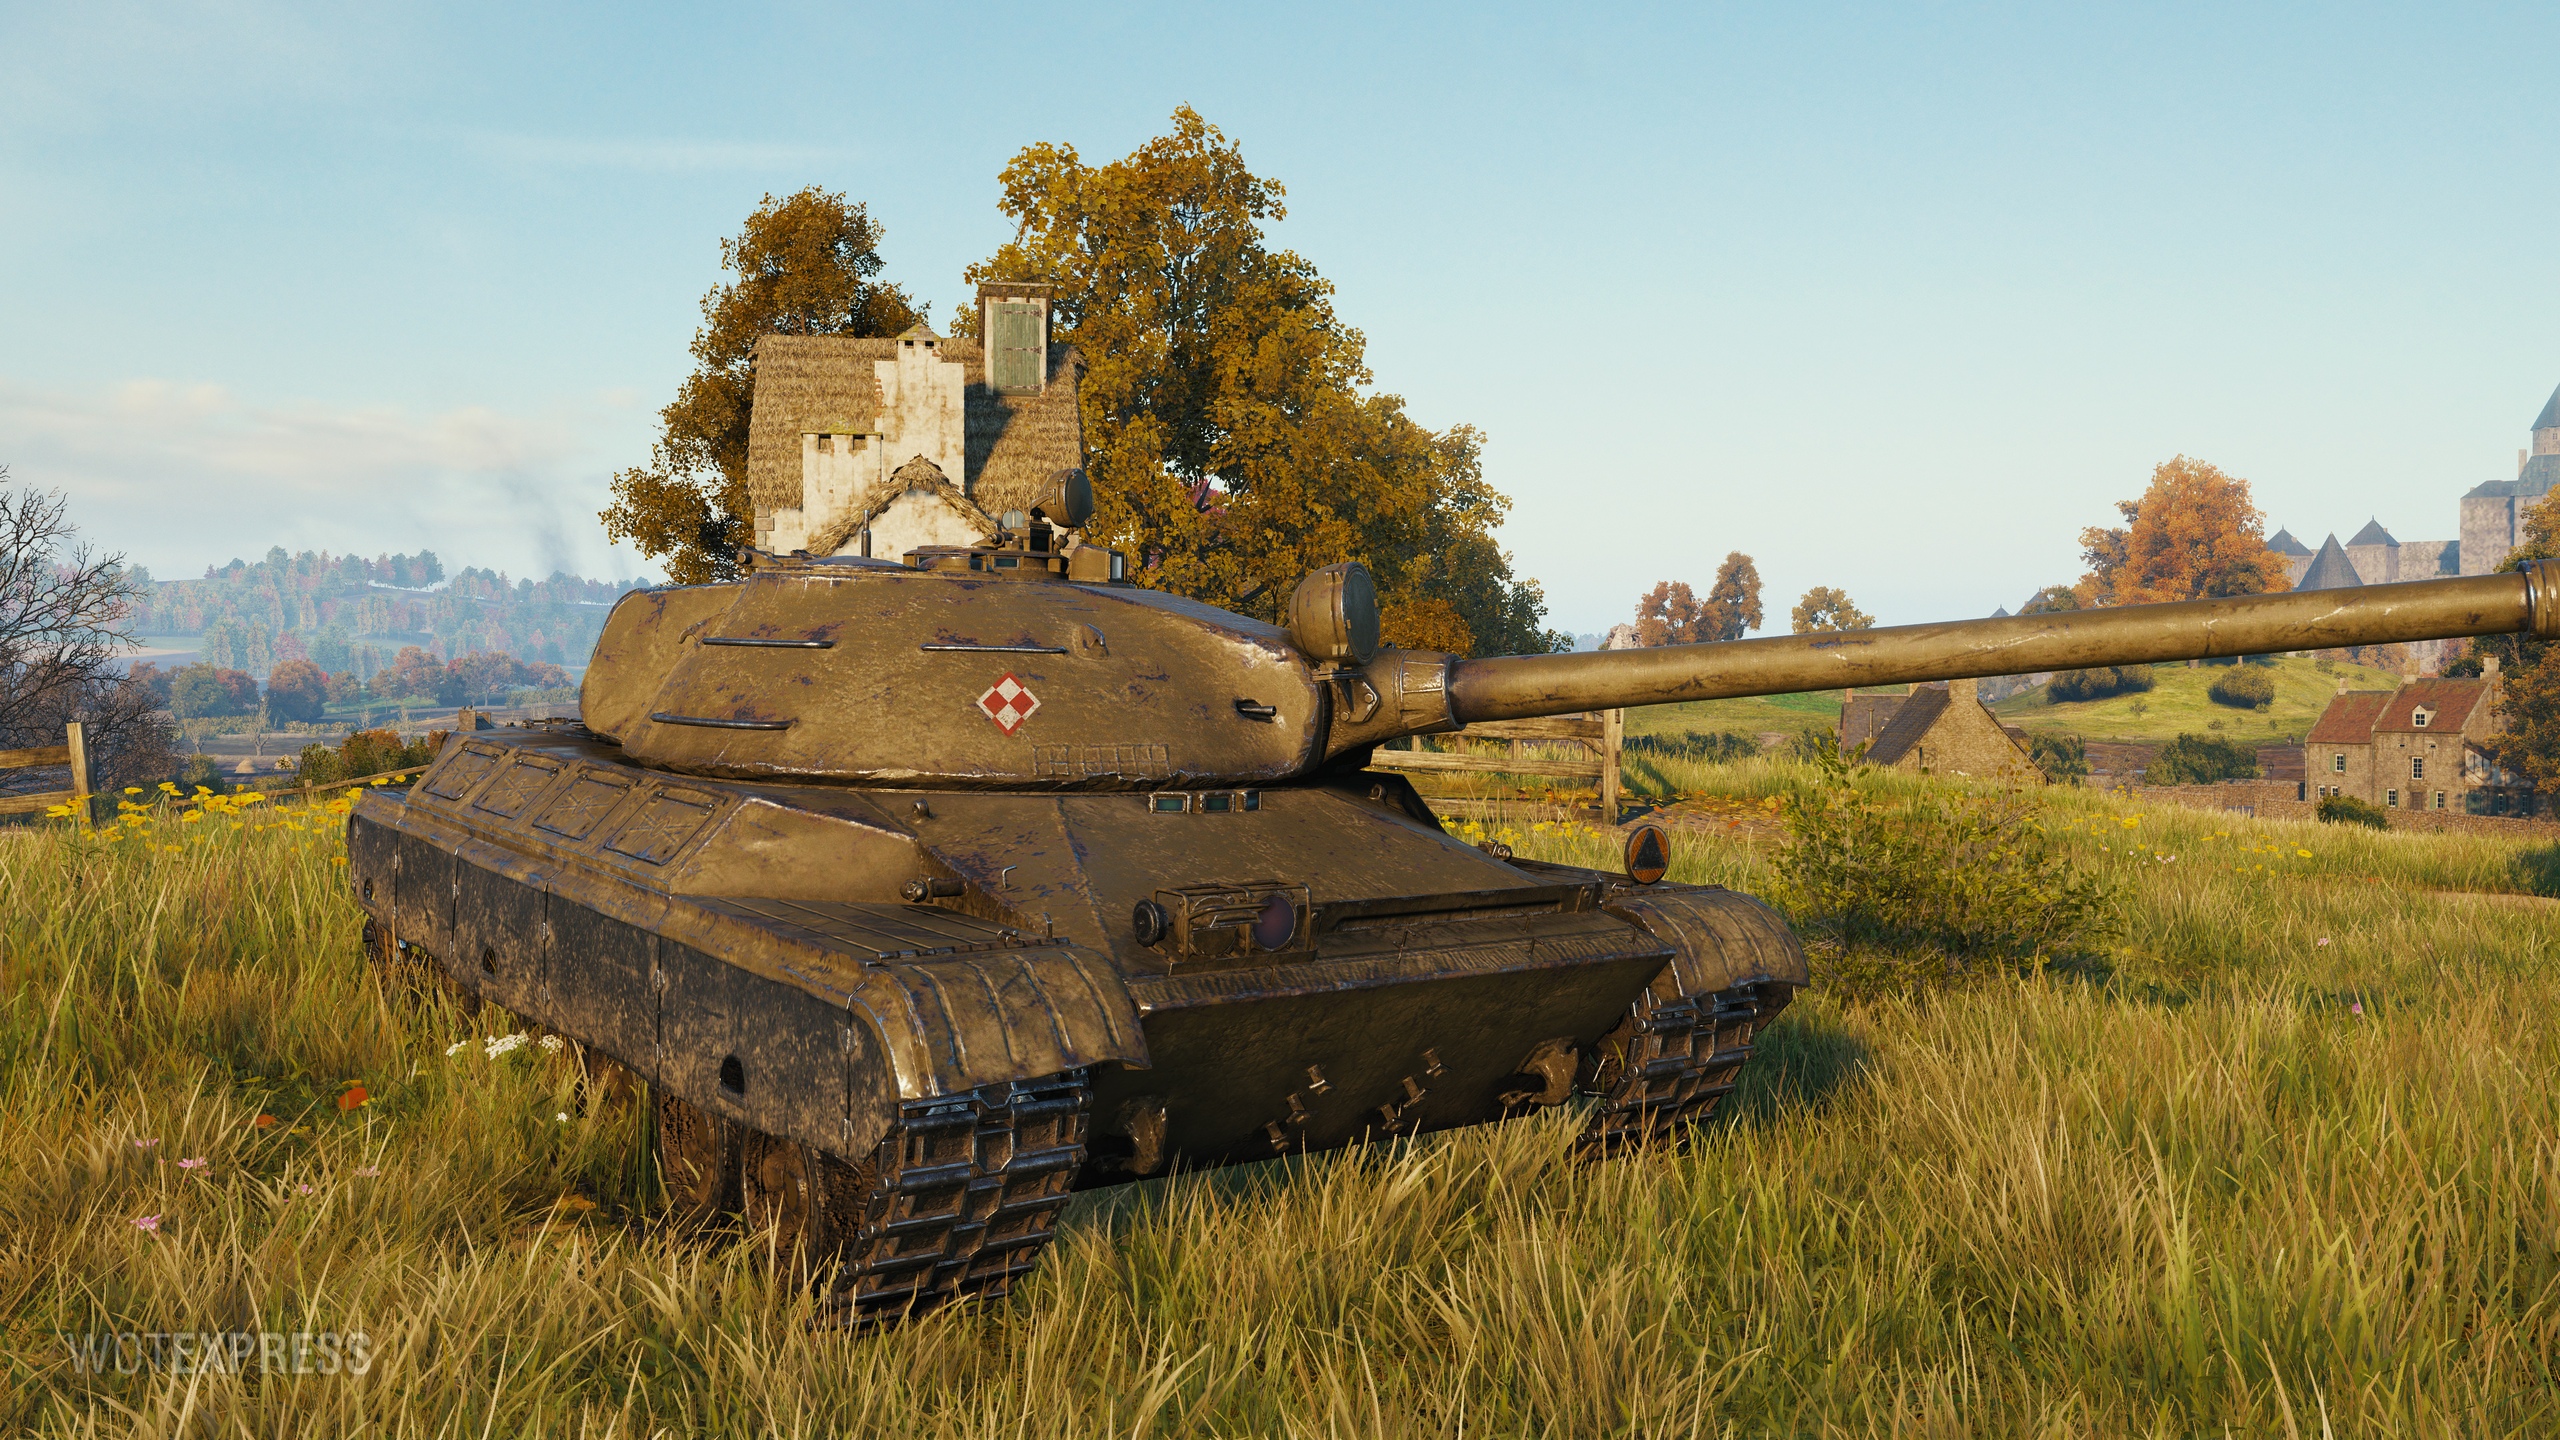 Wot from wit. CS 63 танк. Ст-1 танк в World of Tanks. World of Tanks CS 63. Т-30 танк.